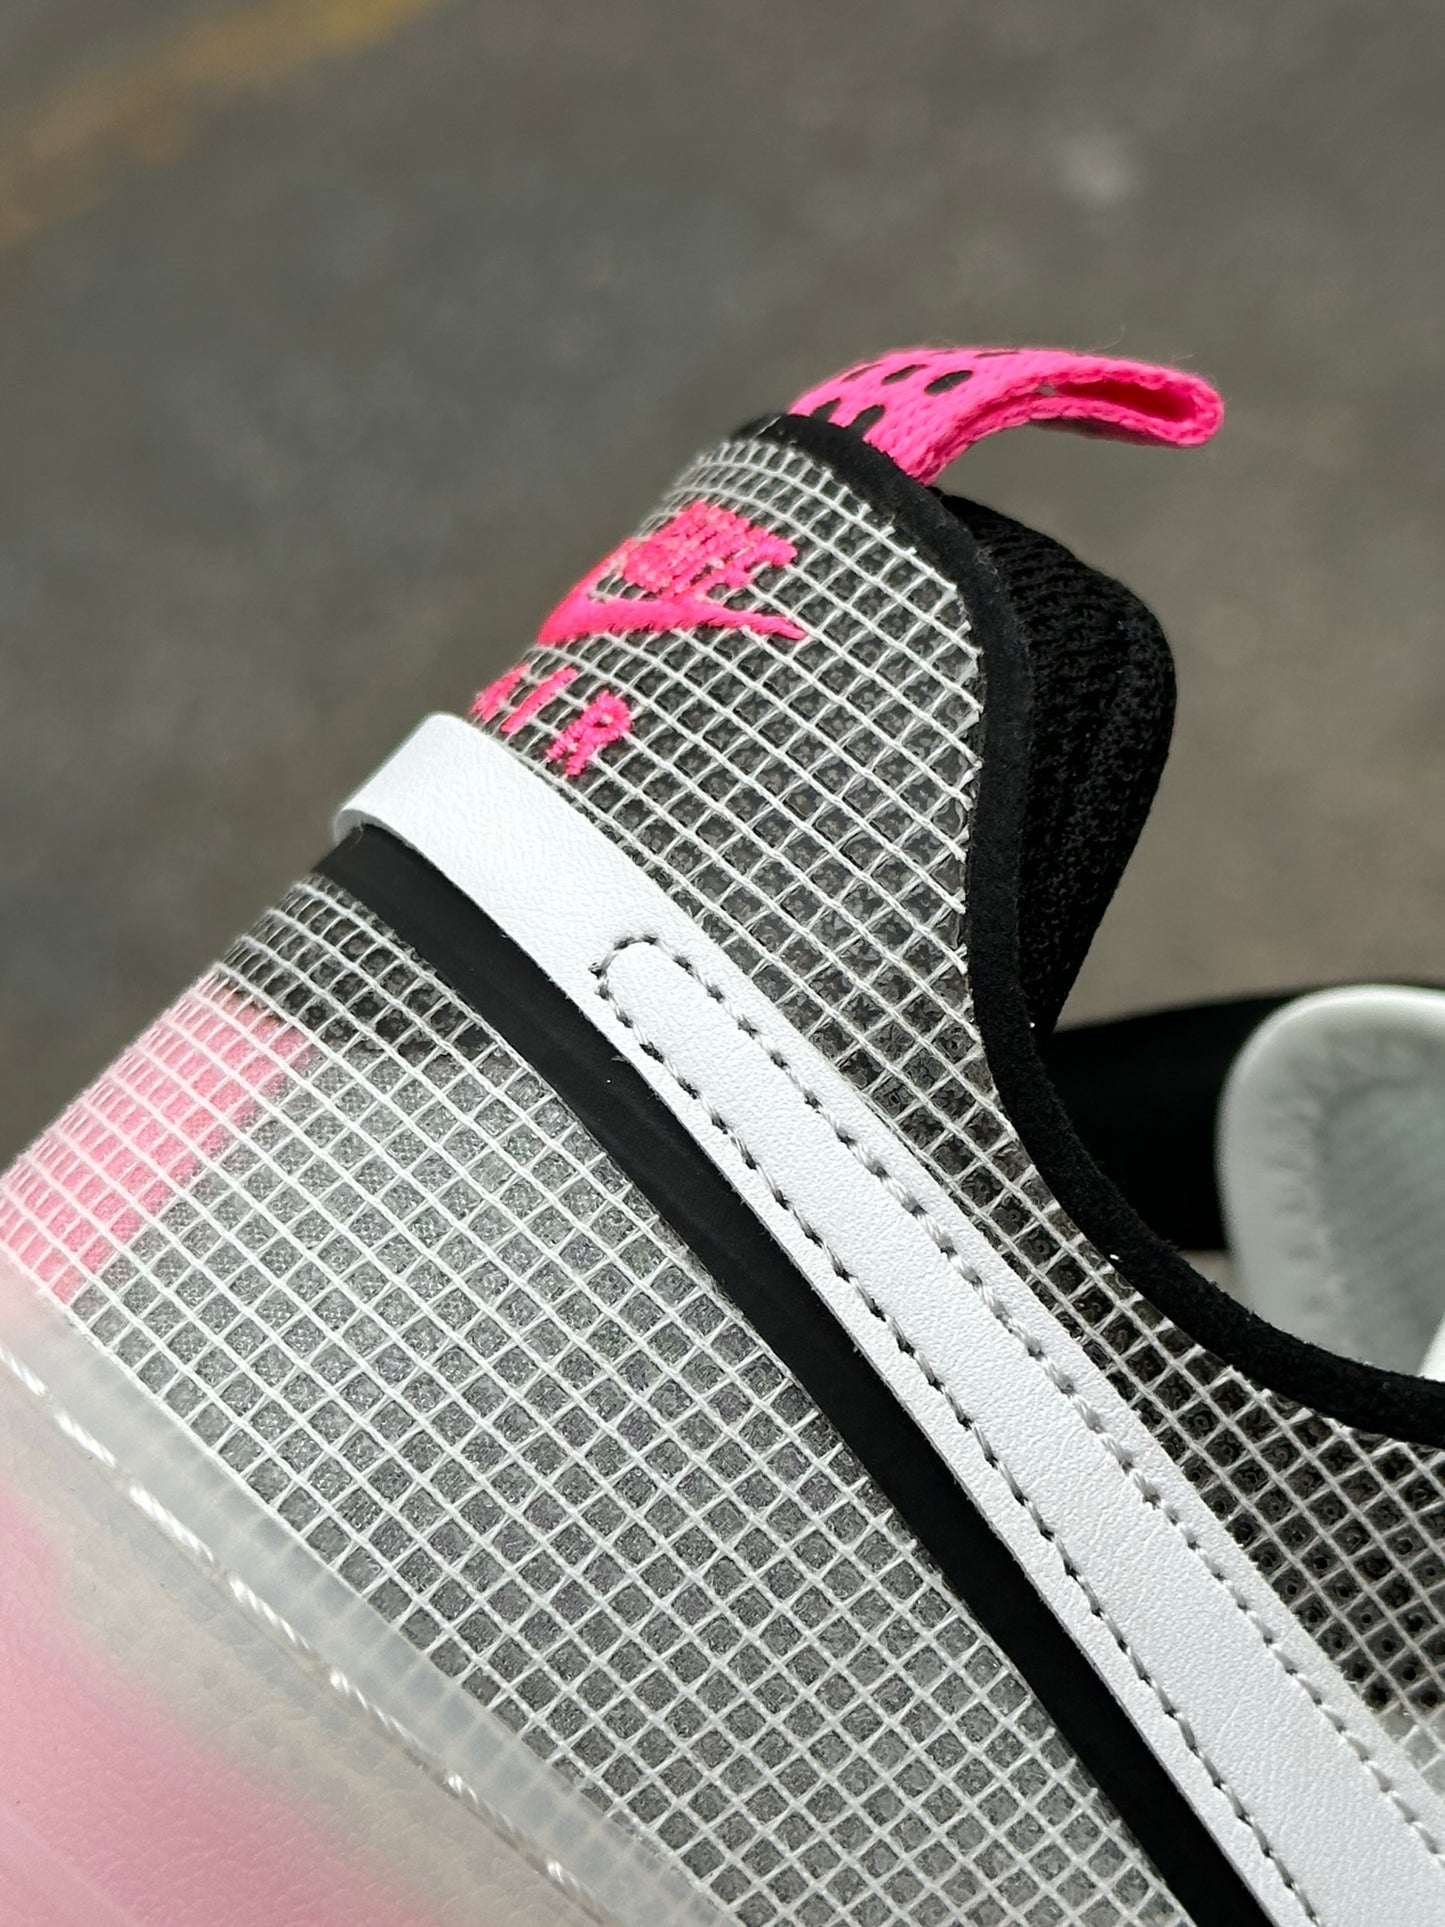 Air Force 1 React White Black Pink Spell